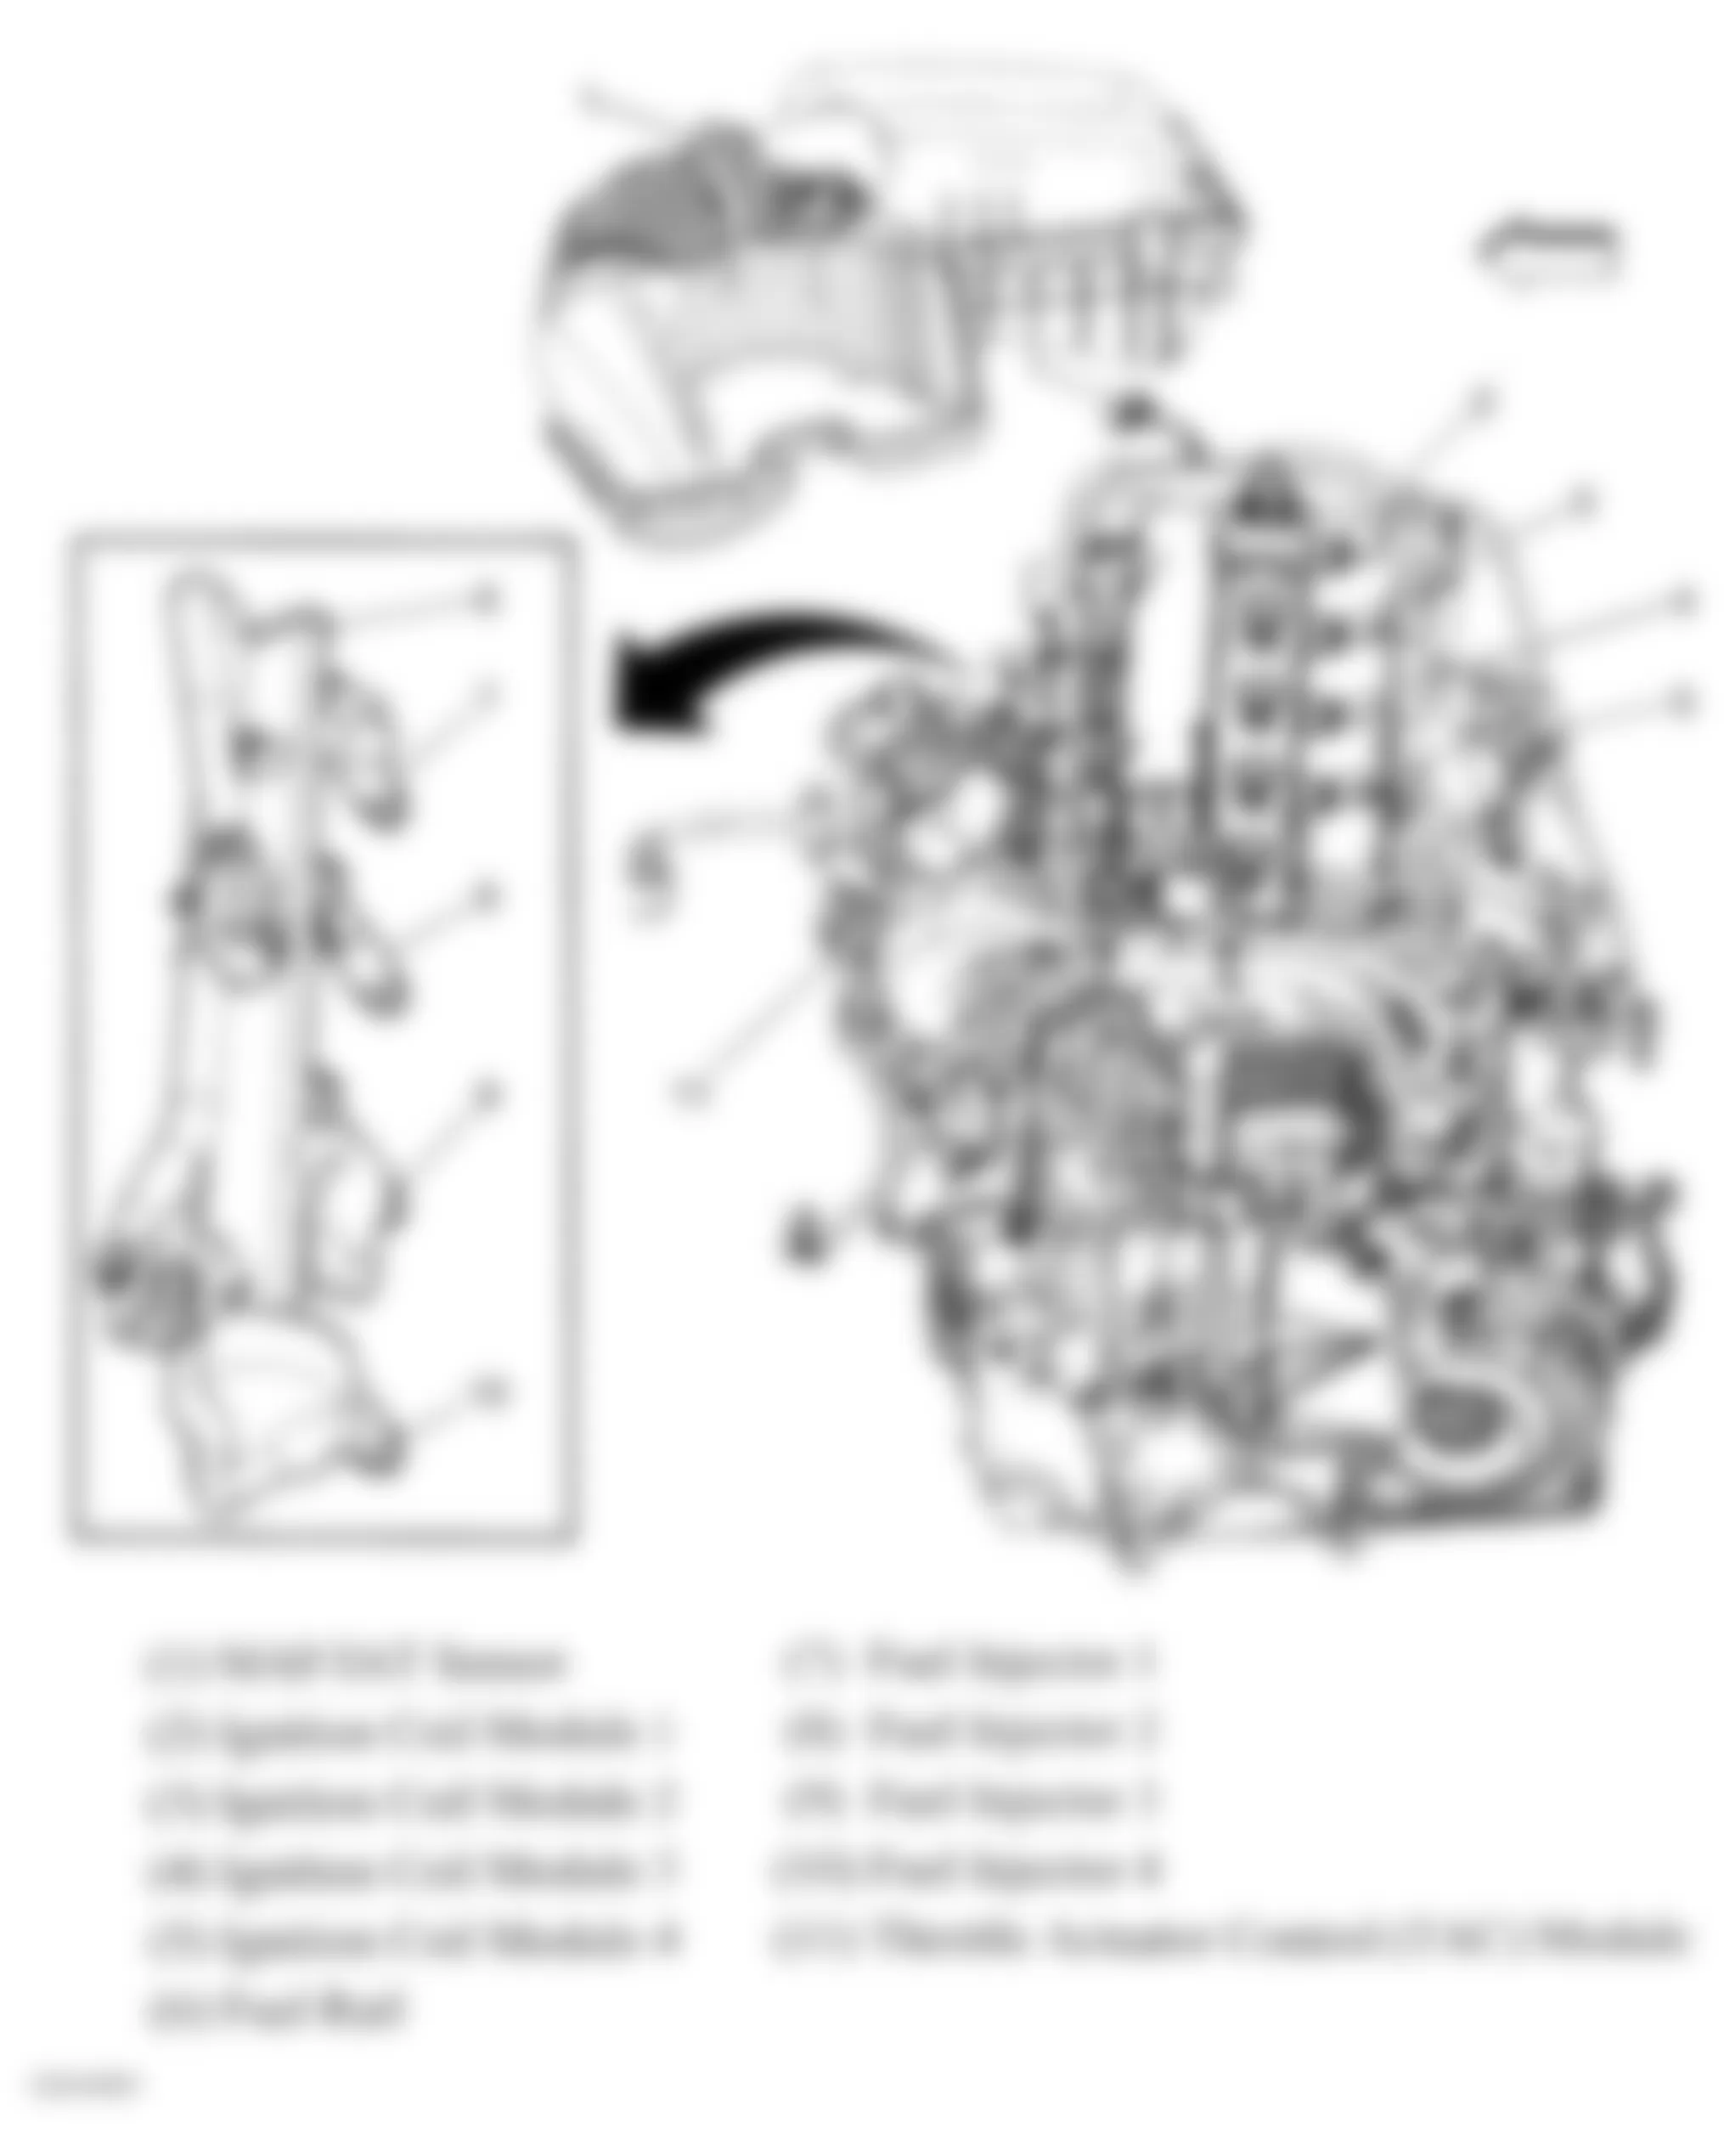 Chevrolet HHR LT 2009 - Component Locations -  Left Side View Of Engine